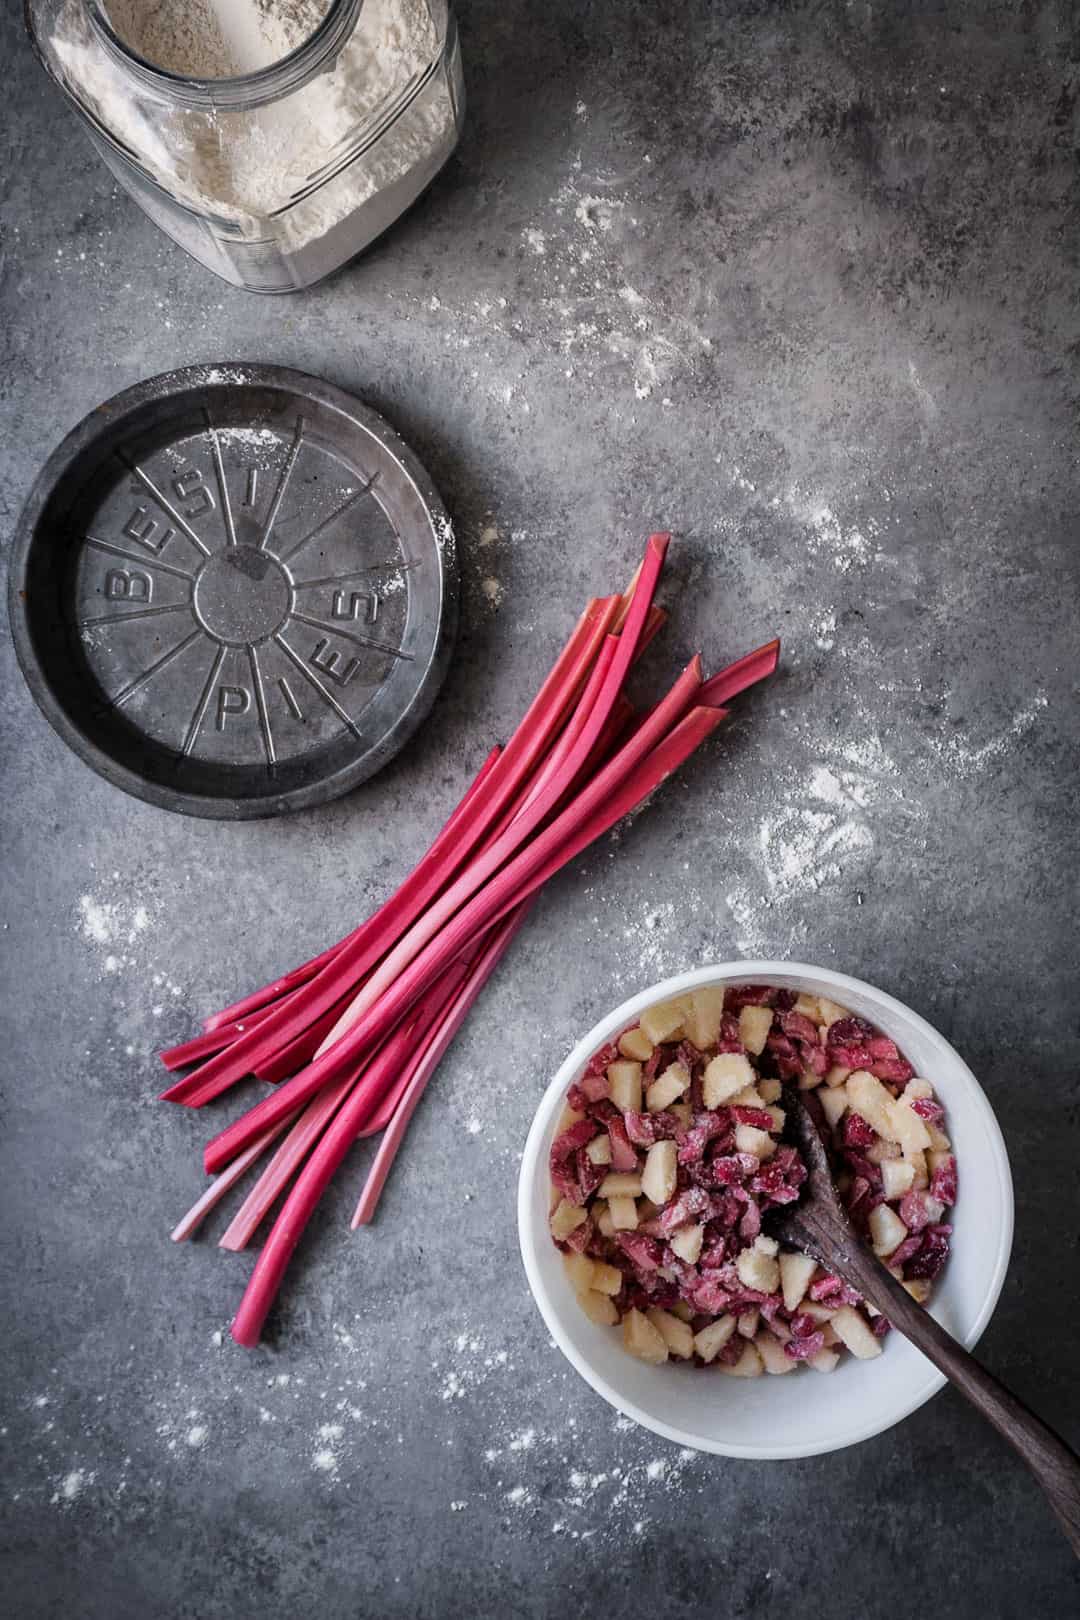 making a rhubarb apple pie with ginger and lemongrass: top view of rhubarb stalks on grey surface with metal pie tin and container of flour nearby along with white bowl filled with cut up apples and rhubarb